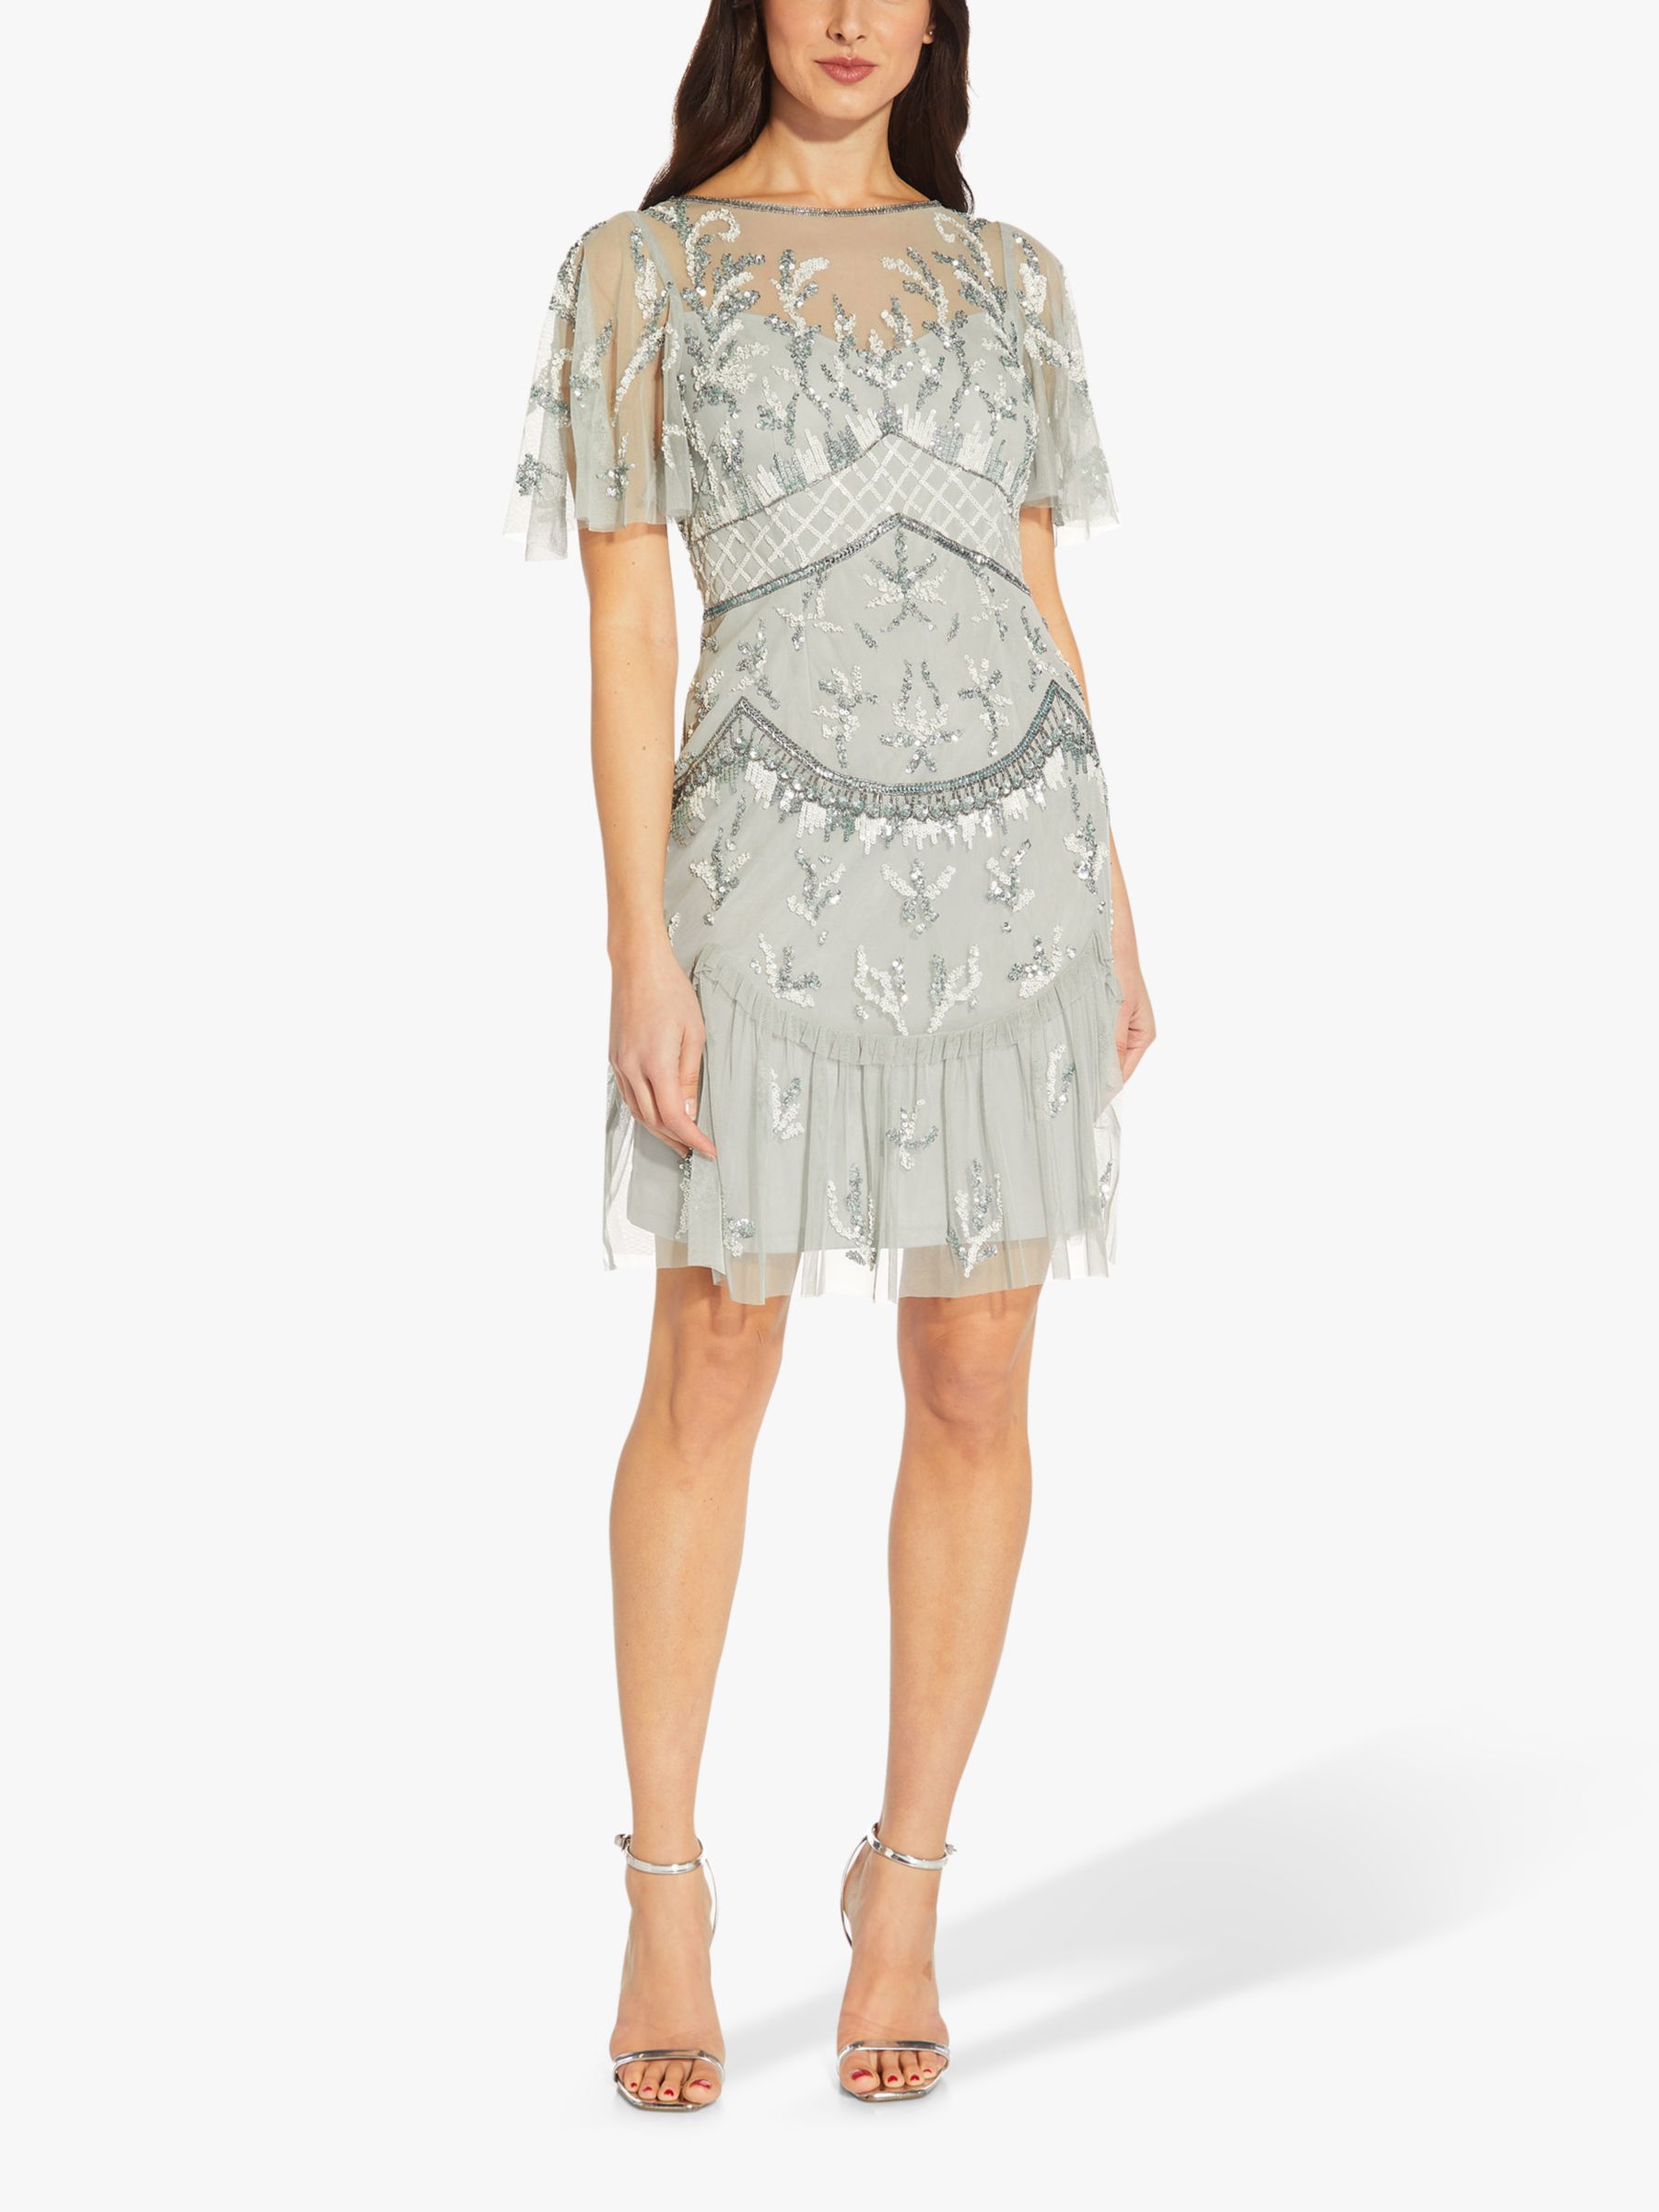 Adrianna Papell Beaded Cocktail Dress ...